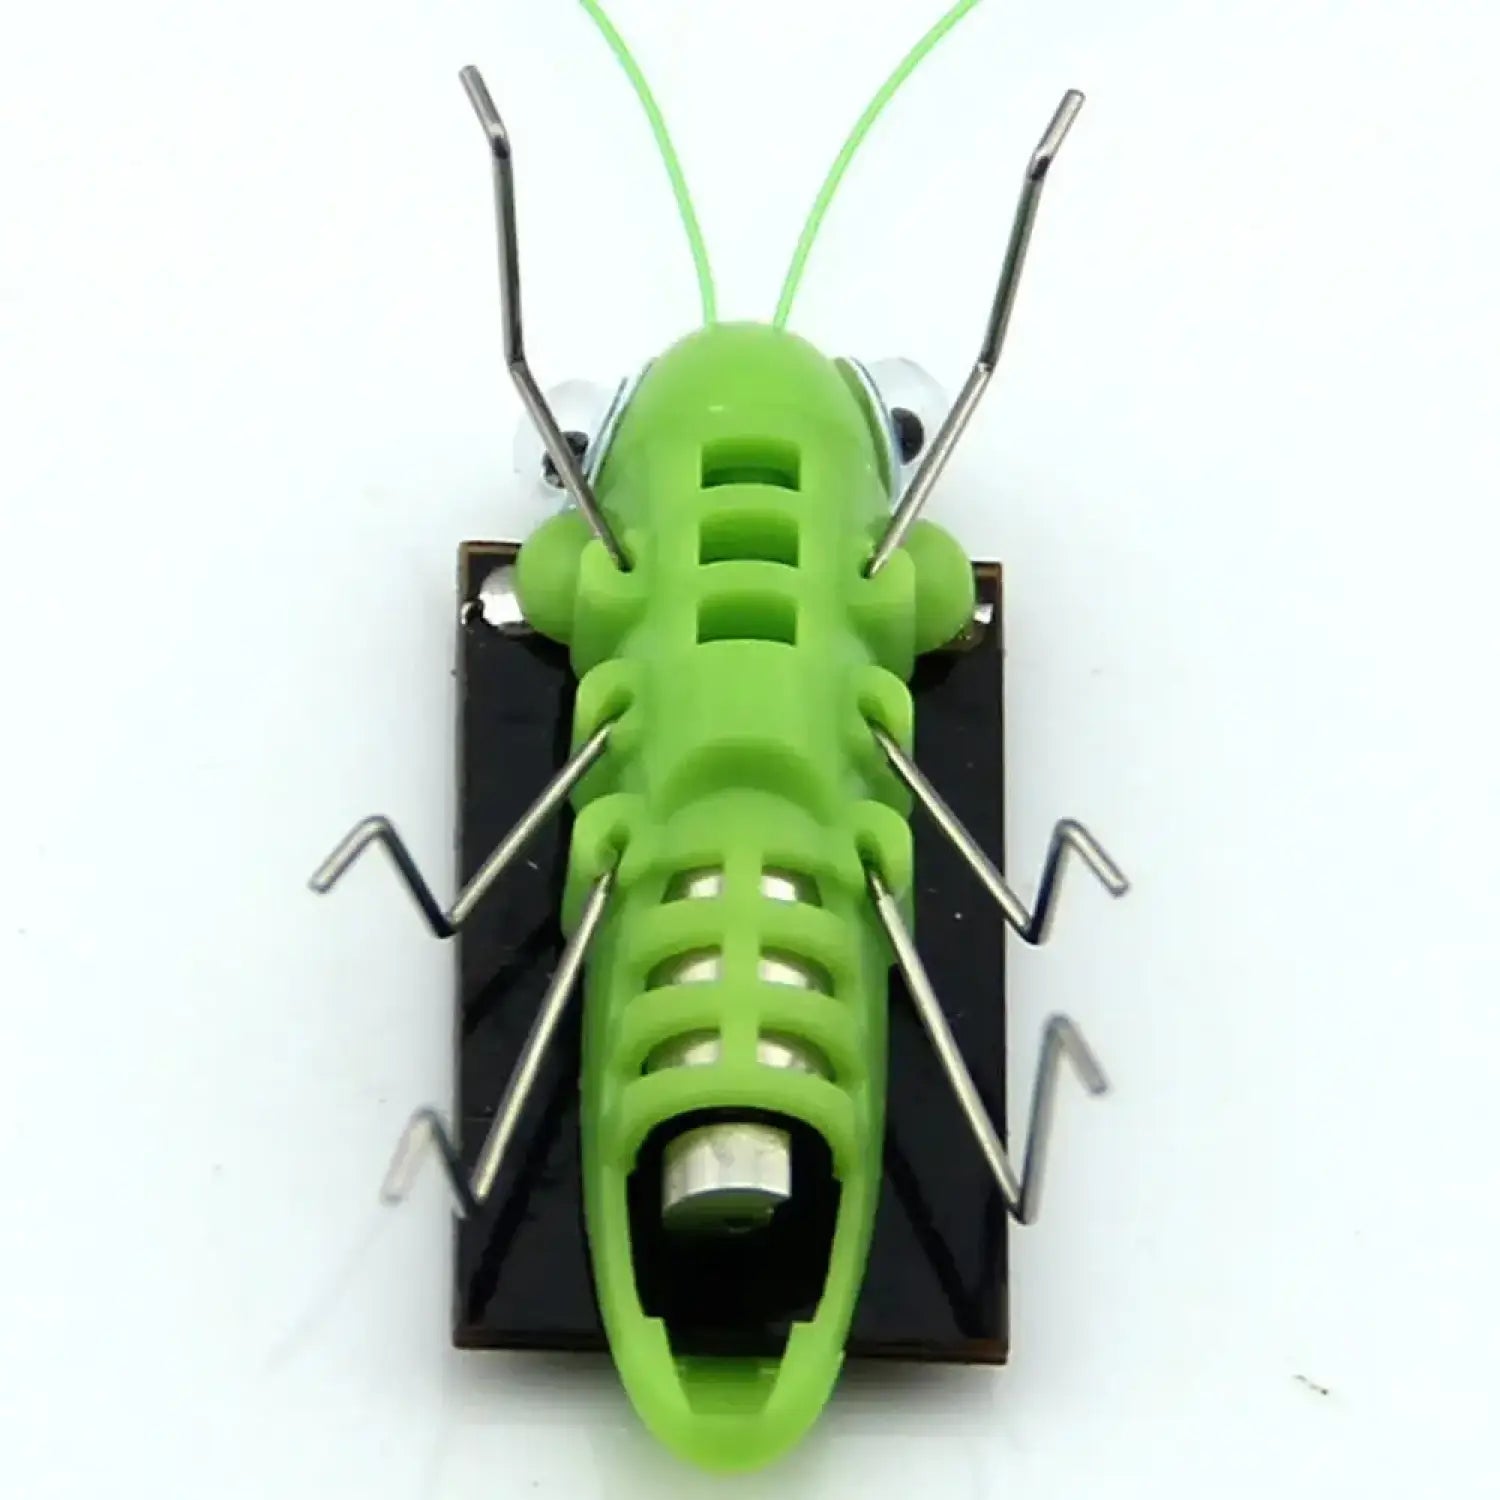 Solar Grasshopper Toy Puzzle Children Selected Gift